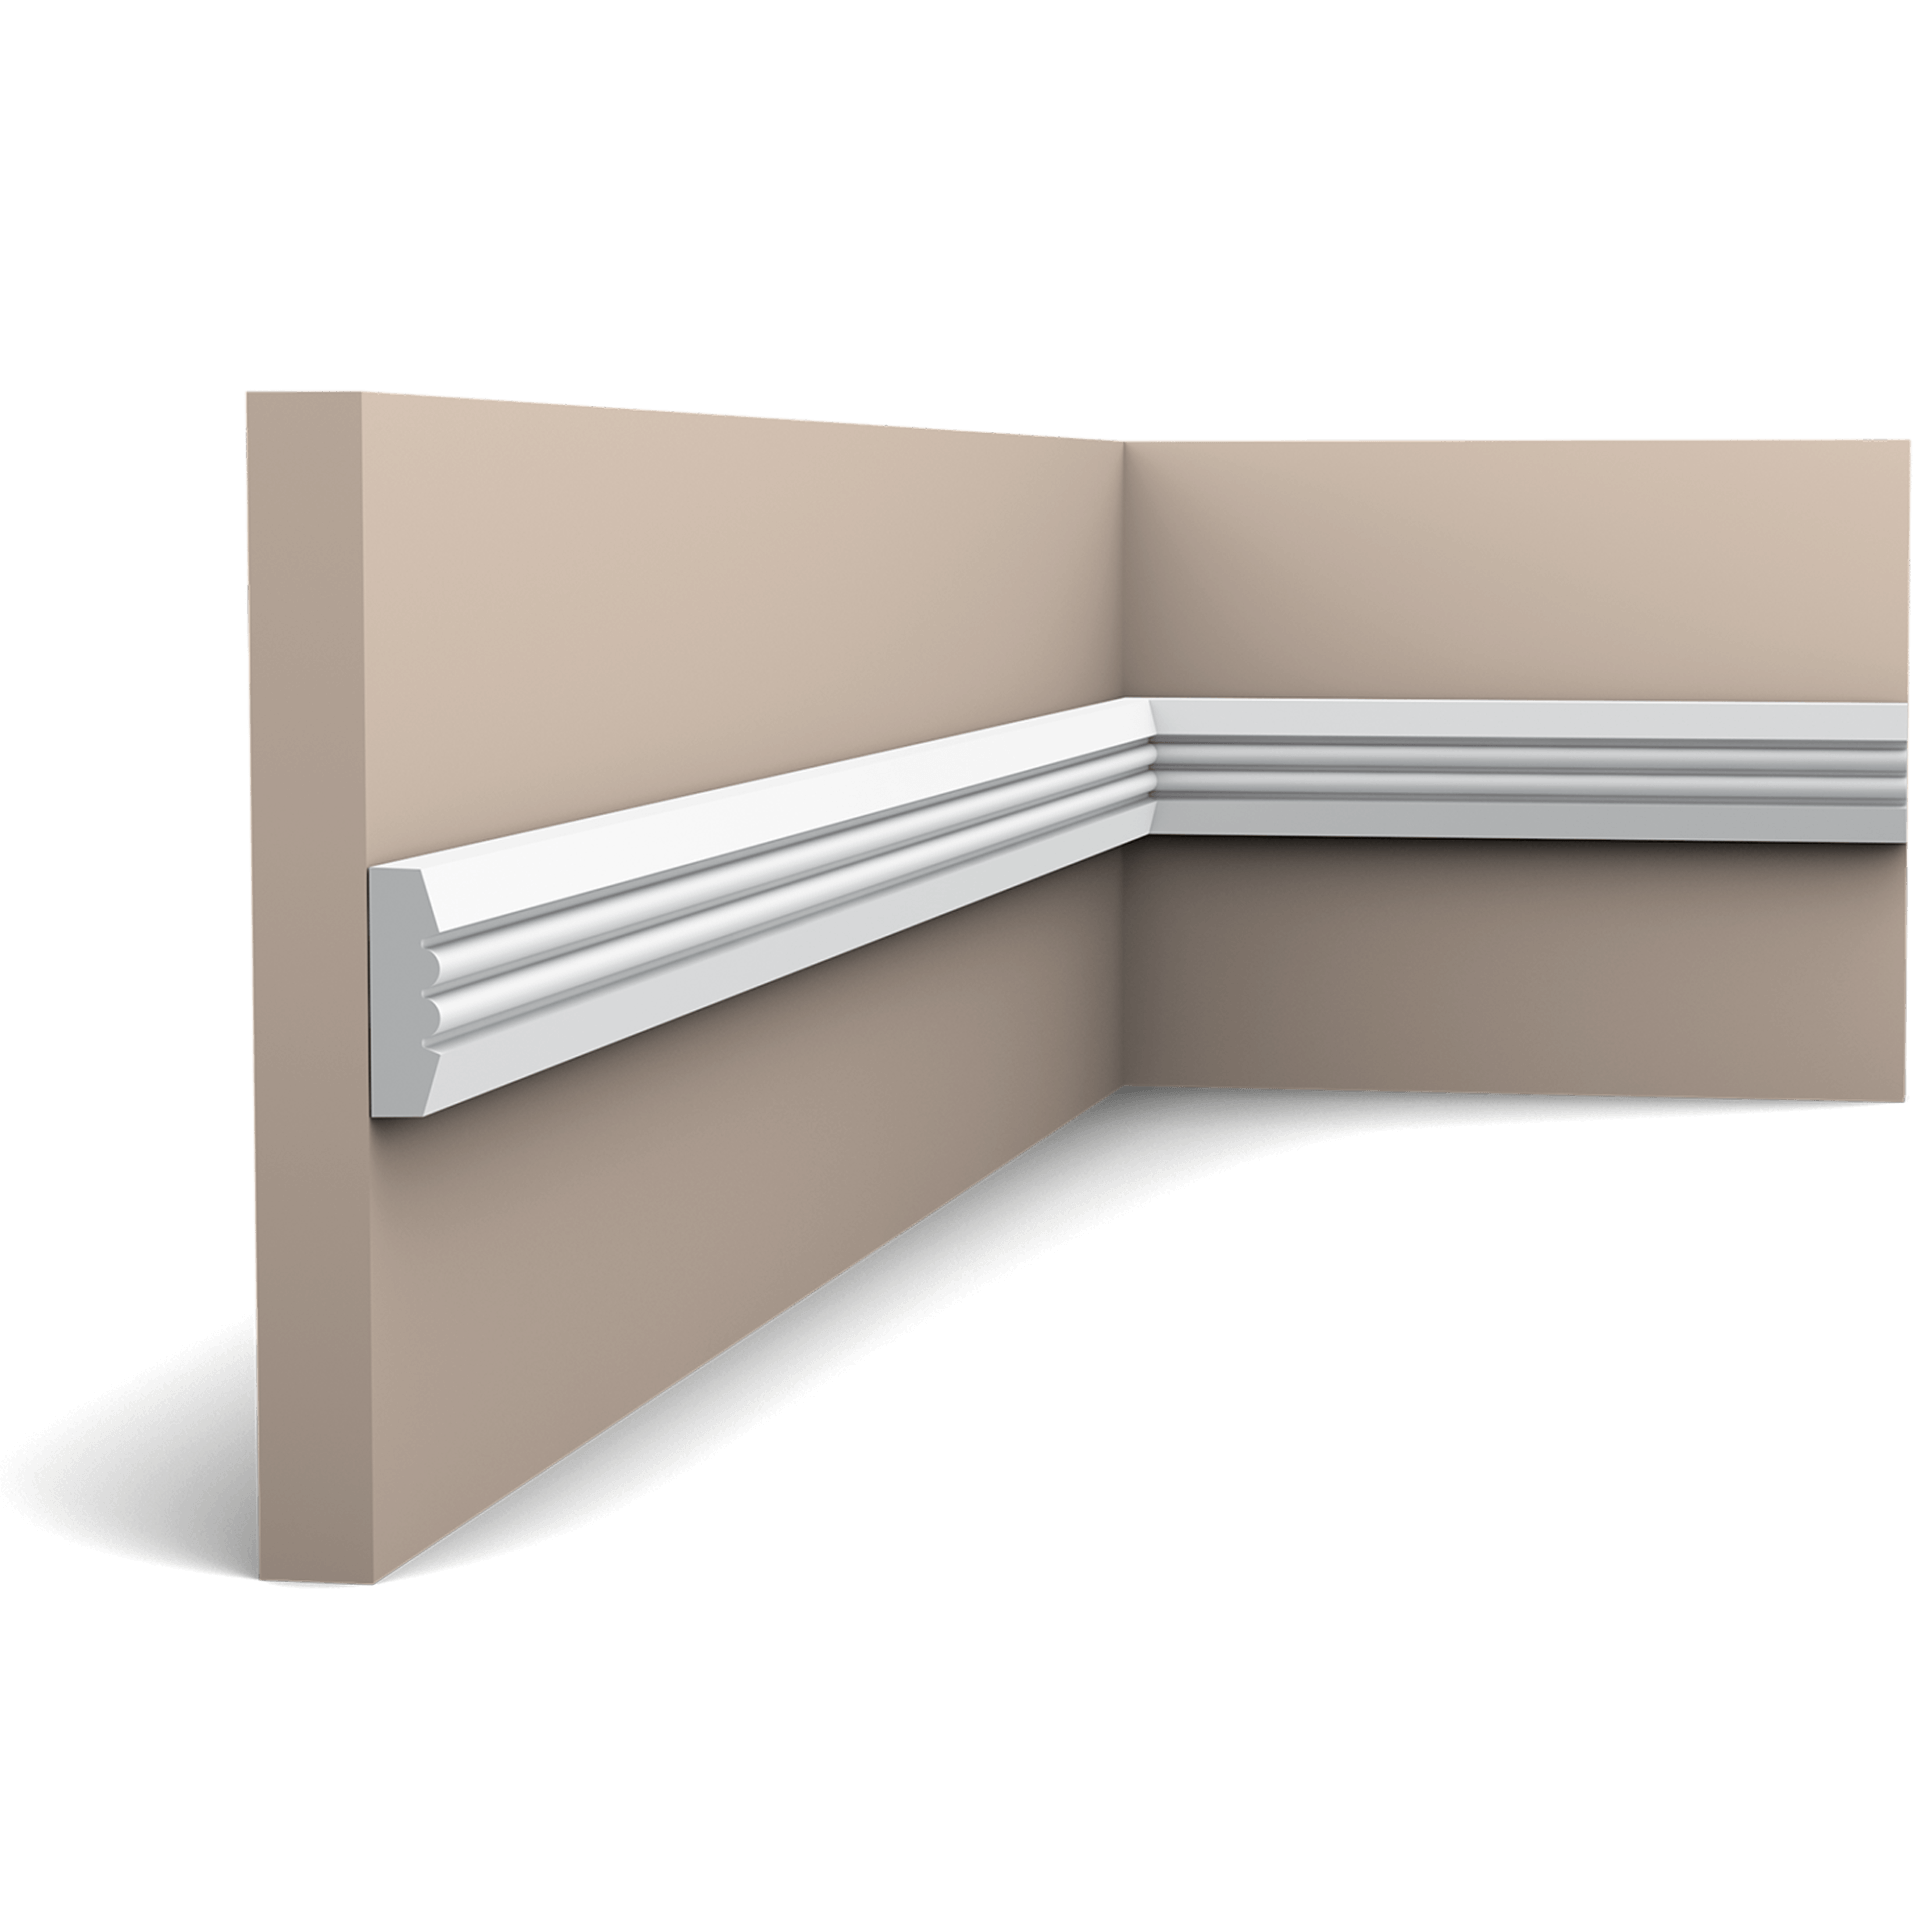 p5021 panel moulding 1992 Simple, flat panel moulding with a linear design.